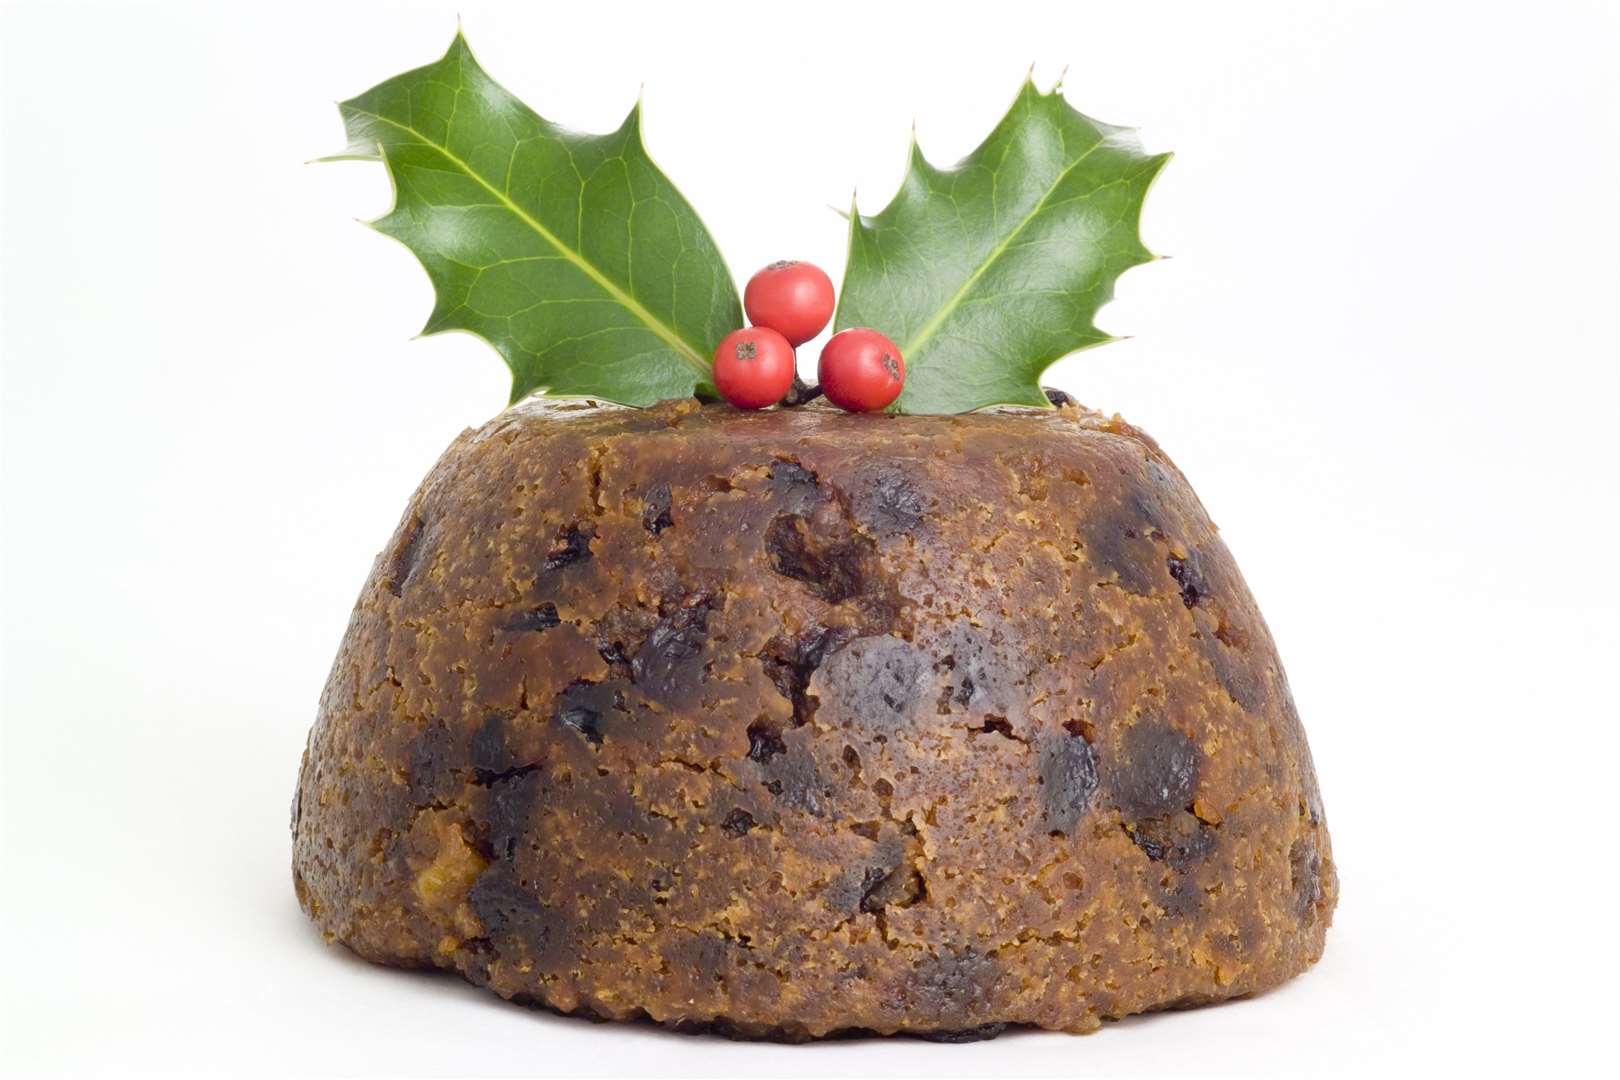 Christmas pudding. Picture: abzee/istock